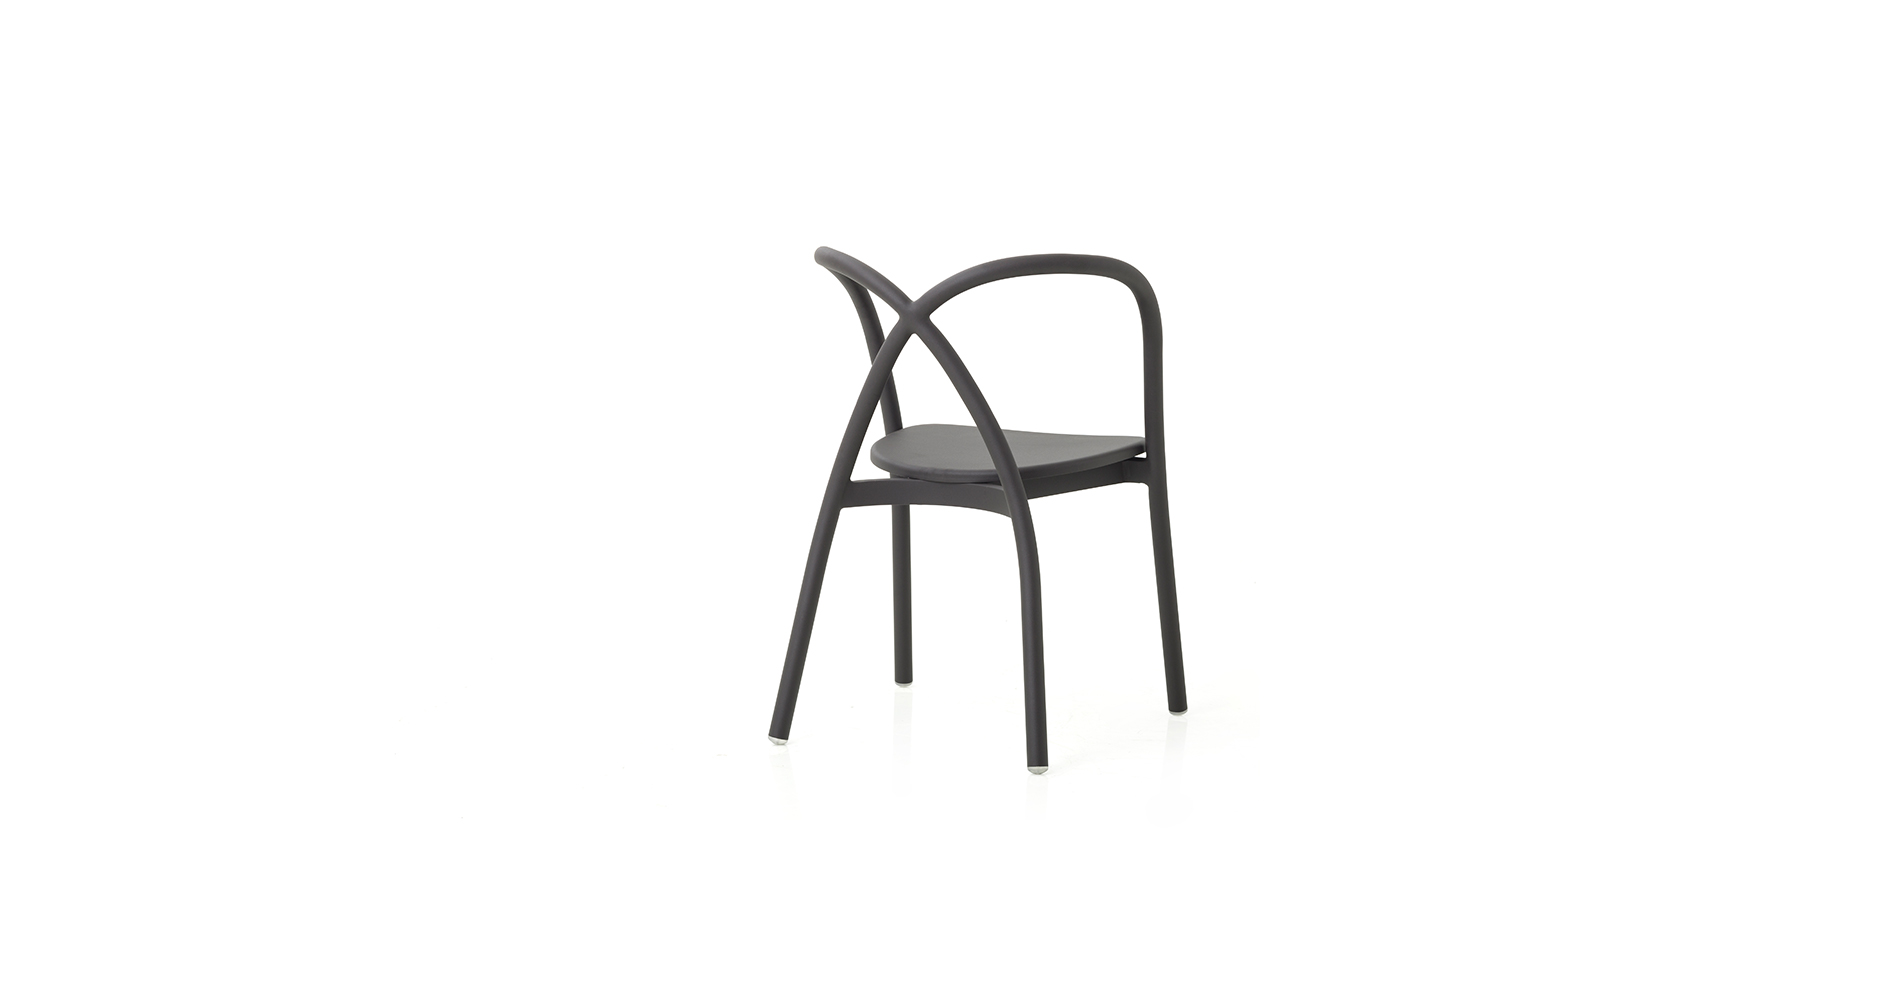 An image of Ming Aluminum Chair